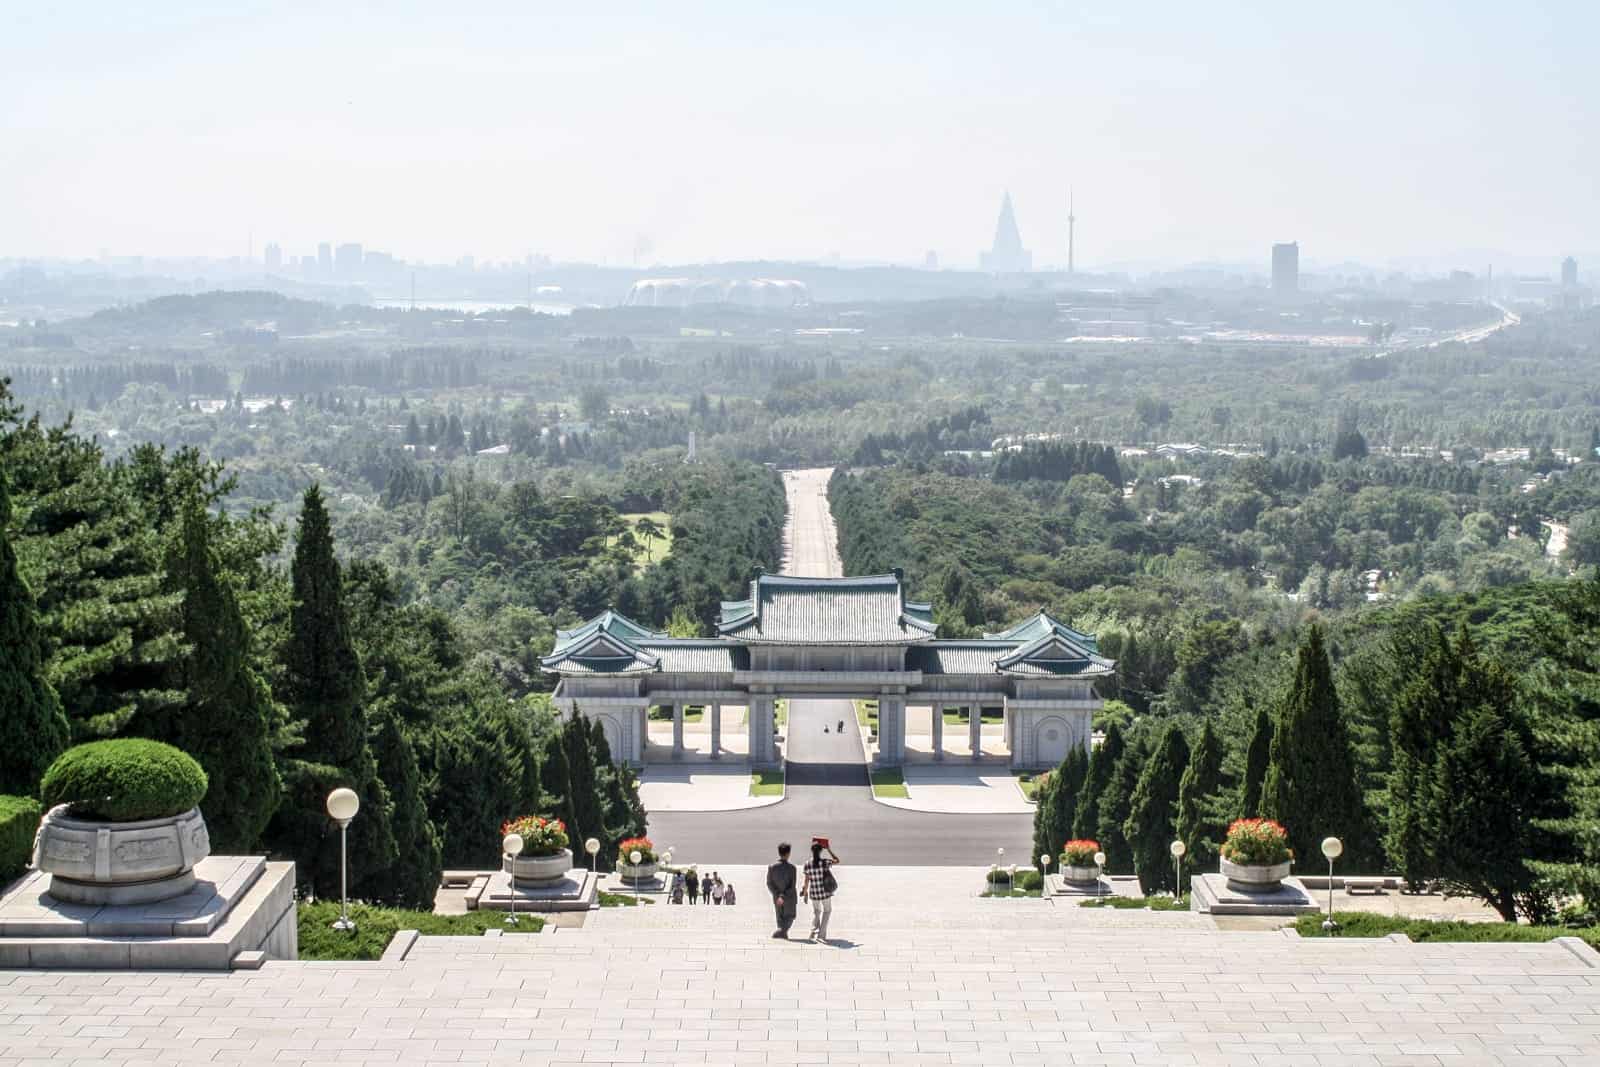 Elevated view of Pyongyang from the top of a hill – one of the sites you see when you travel to North Korea